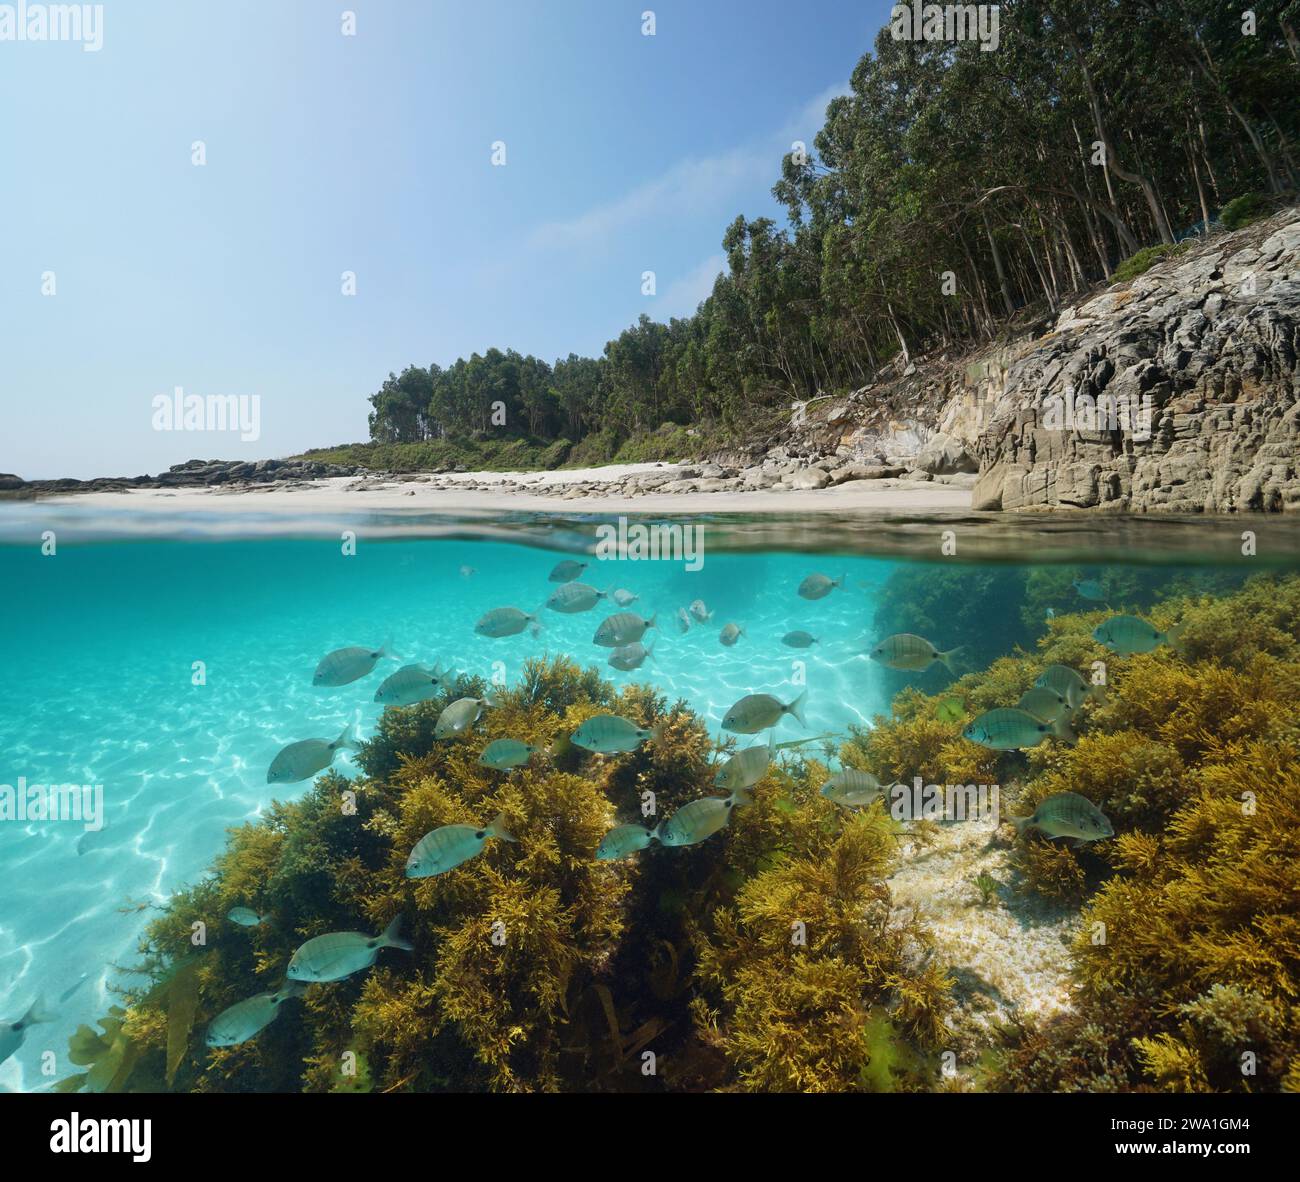 Beach coastline and fish with algae underwater in the Atlantic ocean, split view half over and under water surface, Spain, Galicia, natural scene Stock Photo